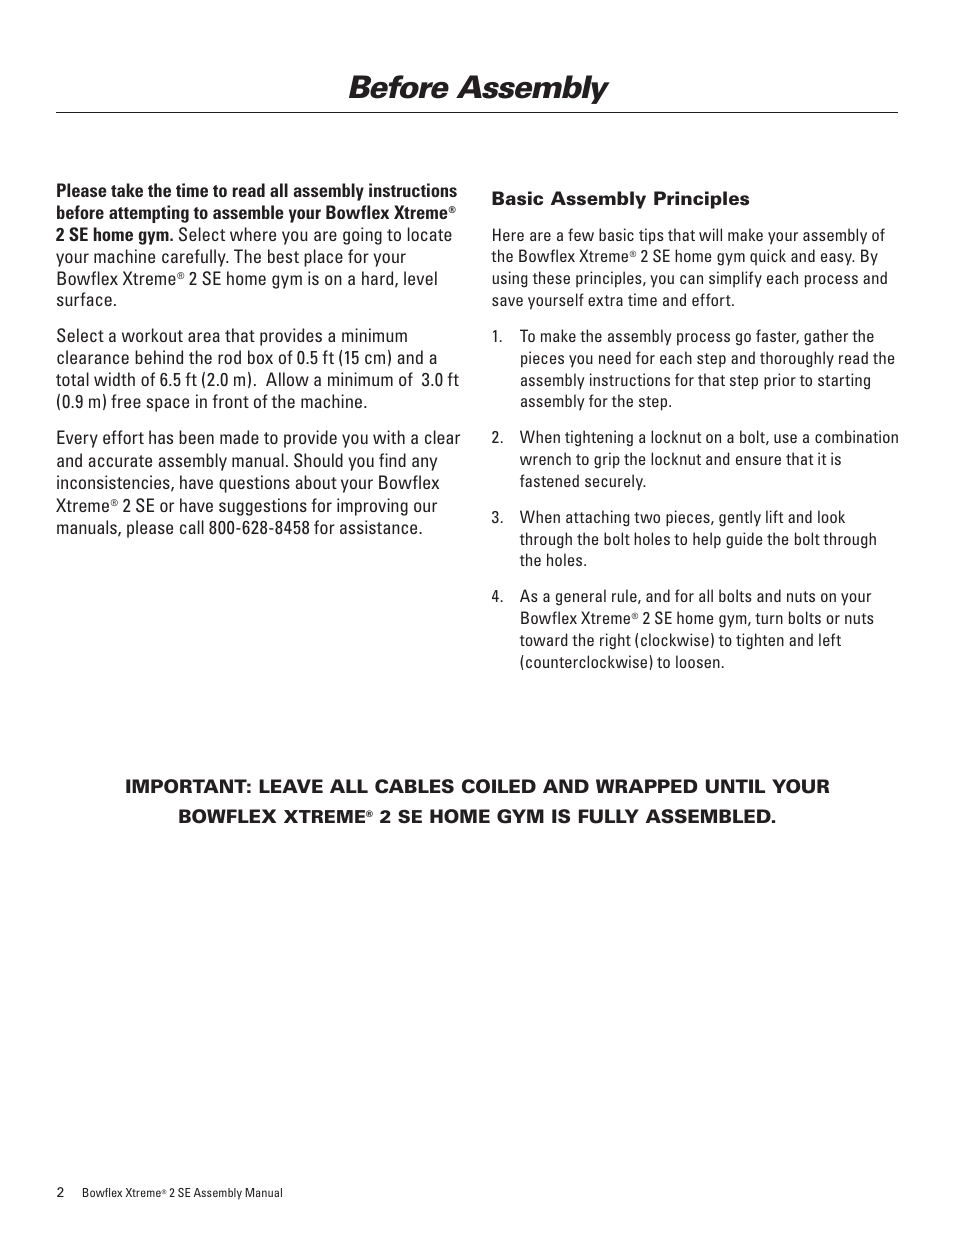 Before assembly | Bowflex Xtreme 2 SE User Manual | Page 6 / 28